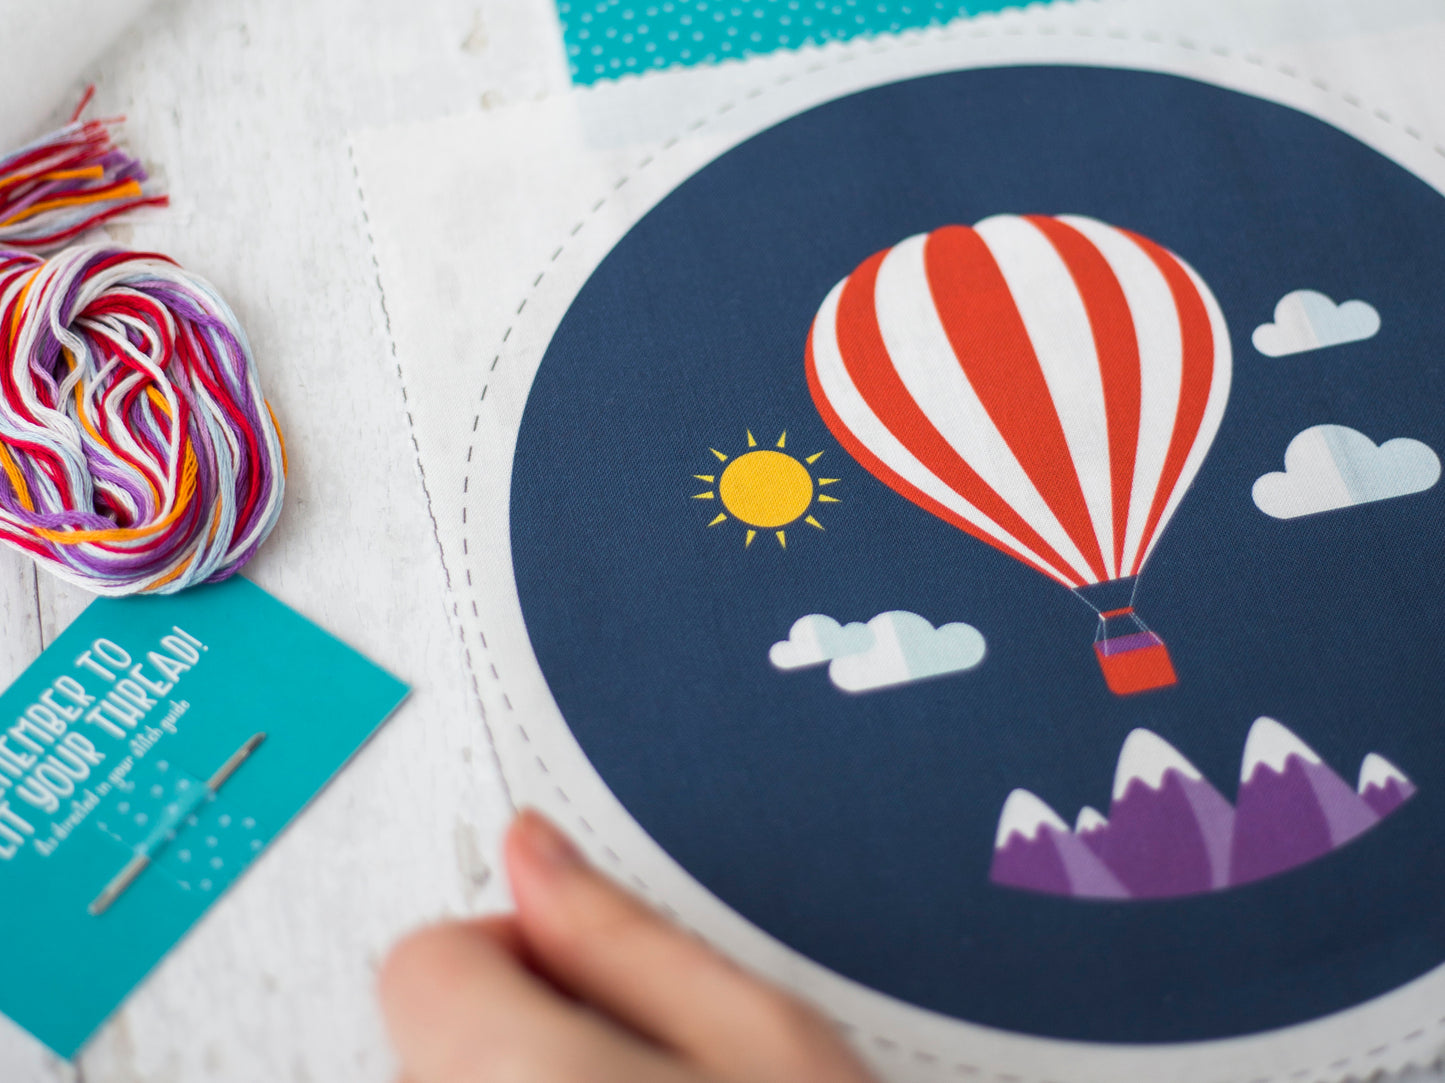 Hot Air Balloon Embroidery Kit - Embroidery Kits - ohsewbootiful